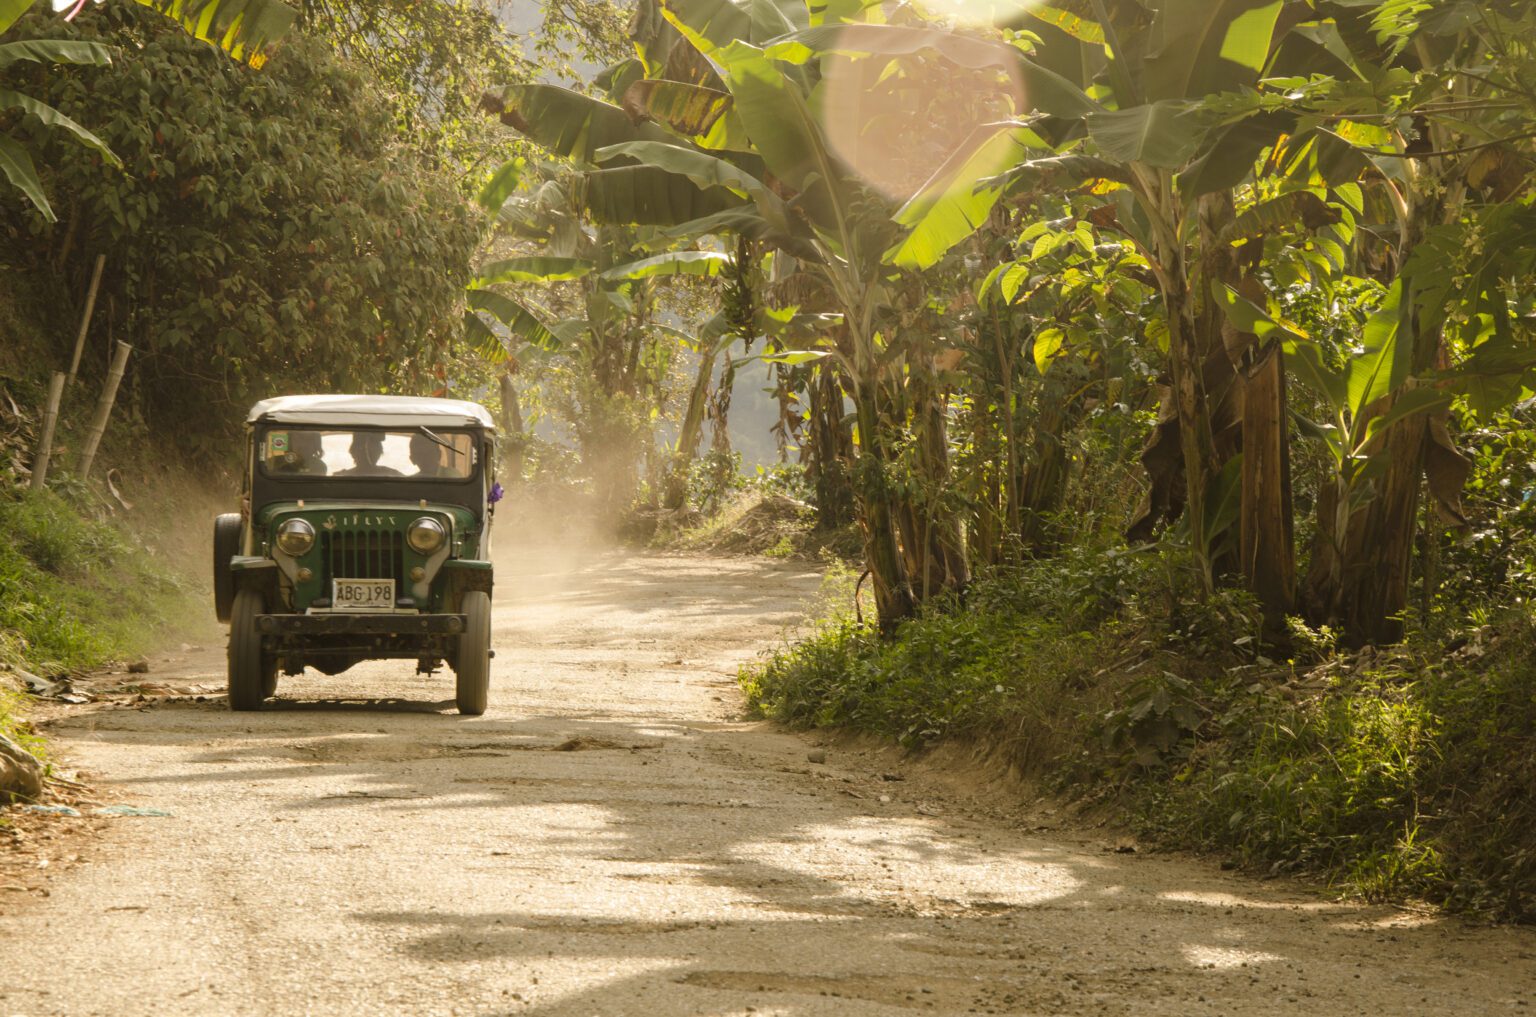 a jeep driving down a dirt road surrounded by trees.